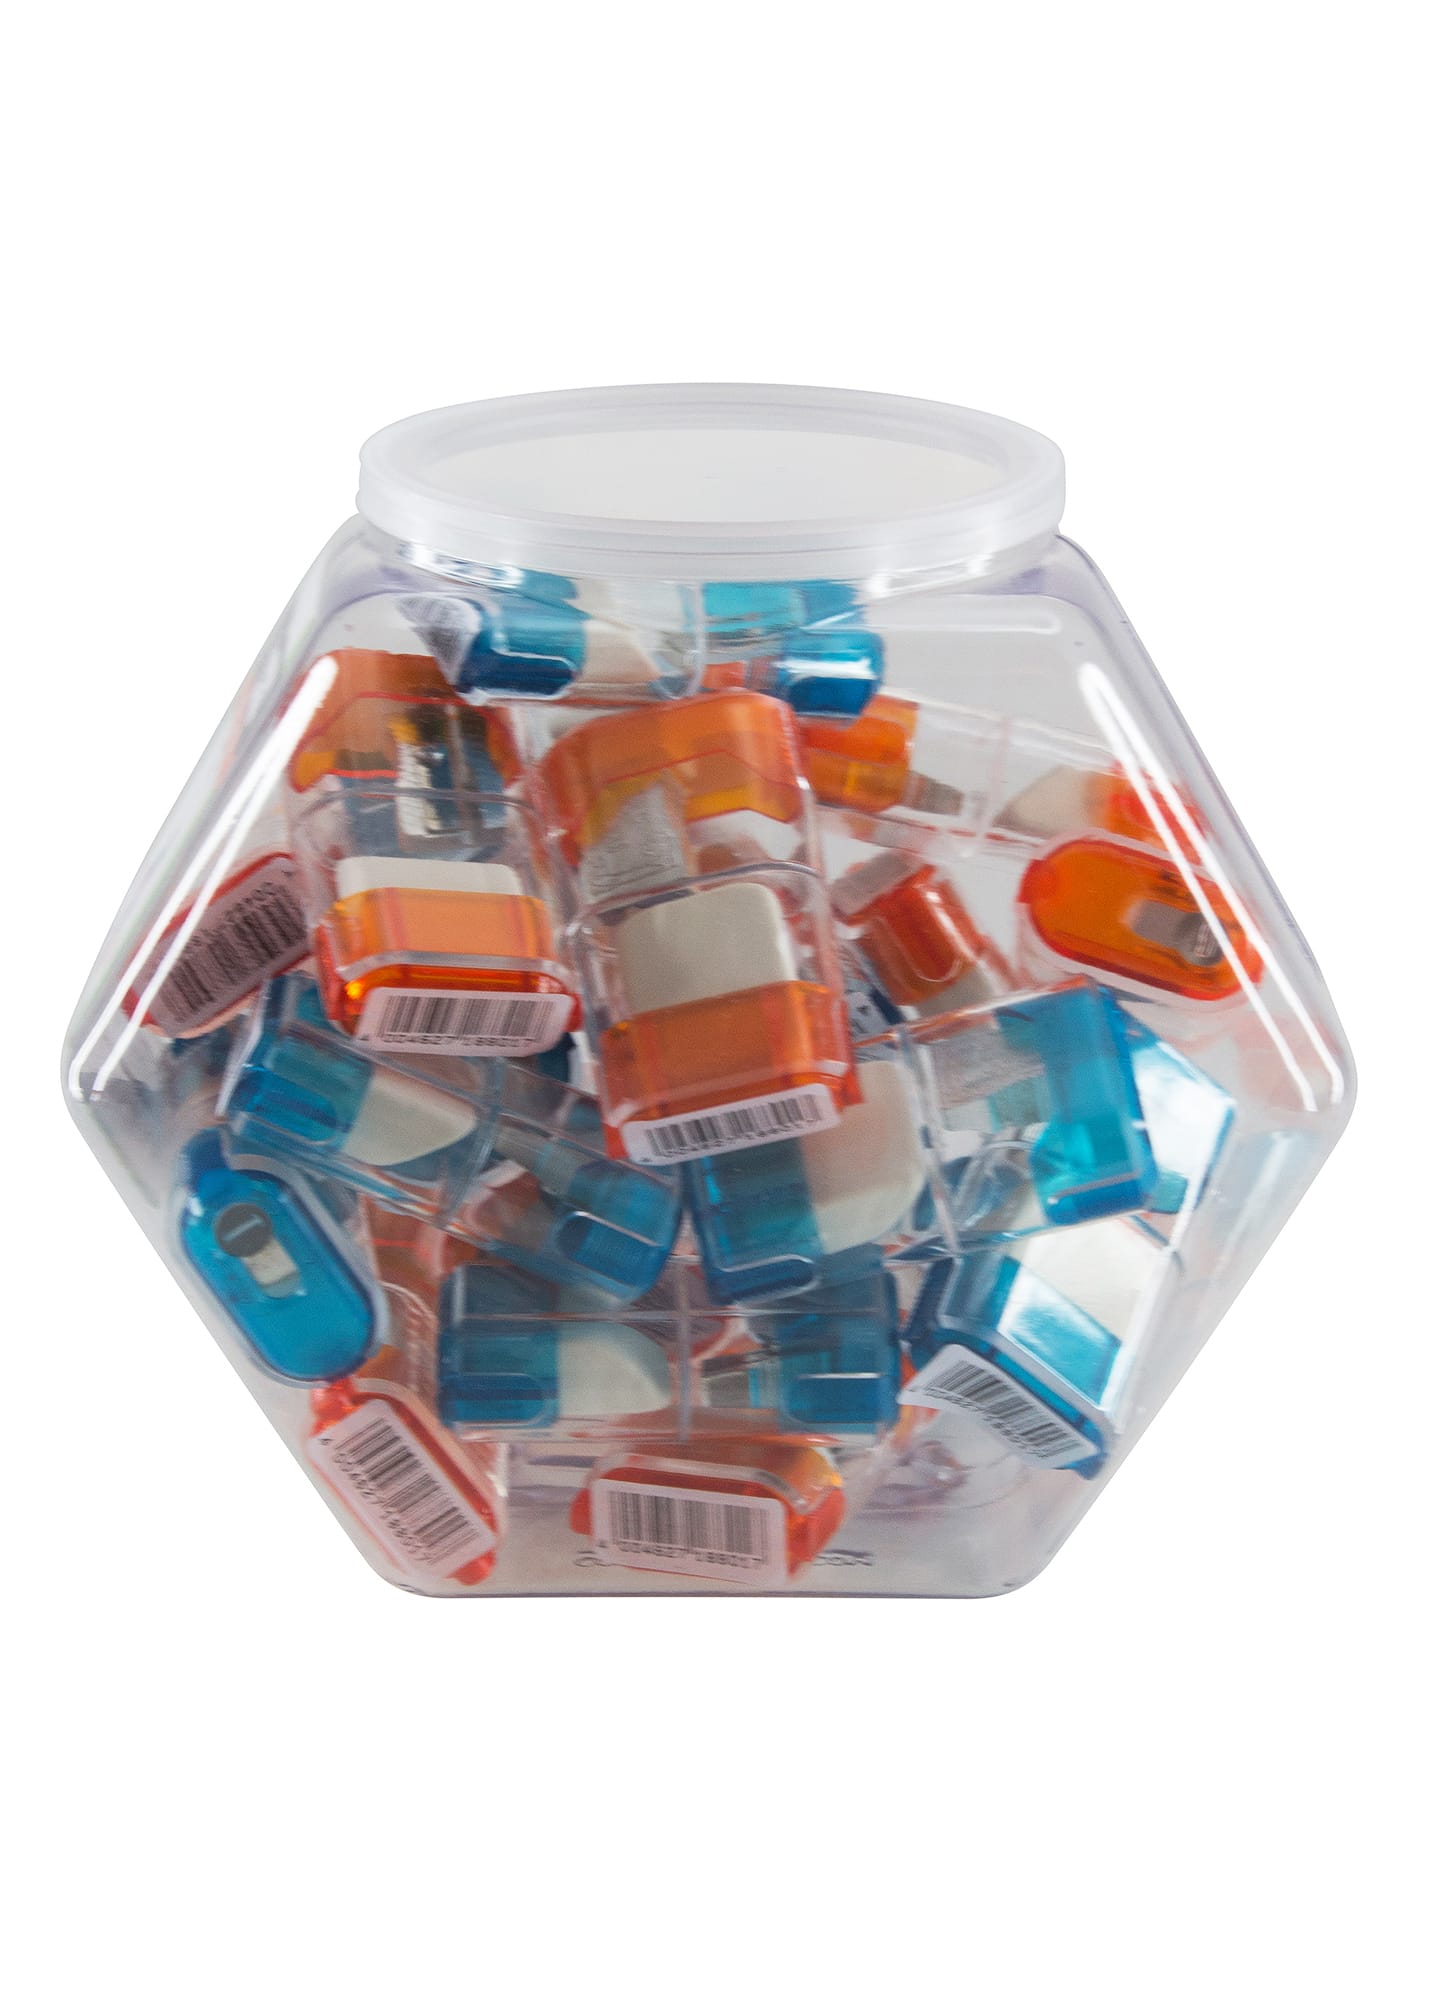 Baumgartens Pencil Sharpeners Trap Door with Eraser Single Hole Hexagonal Tub Display of 25 ASSORTED Colors (19559)